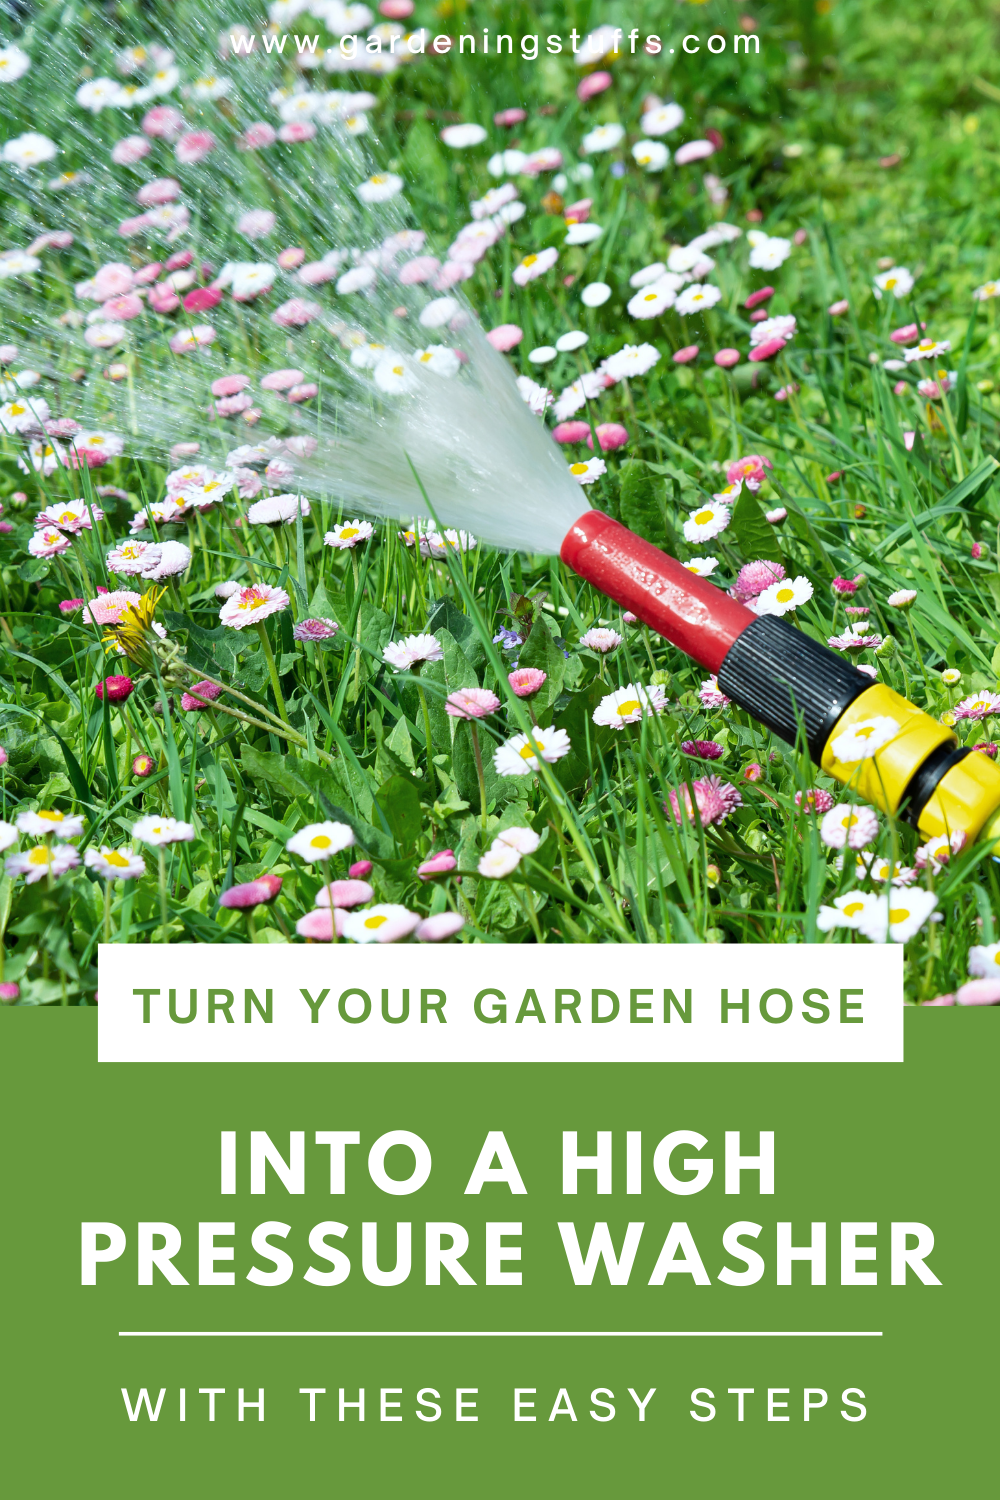 If your garden hose doesn’t generate a high pressure which is enough to clear off the muck. Check out this article, we have listed the easy steps that you need to follow to convert your garden hose into a pressure washer.